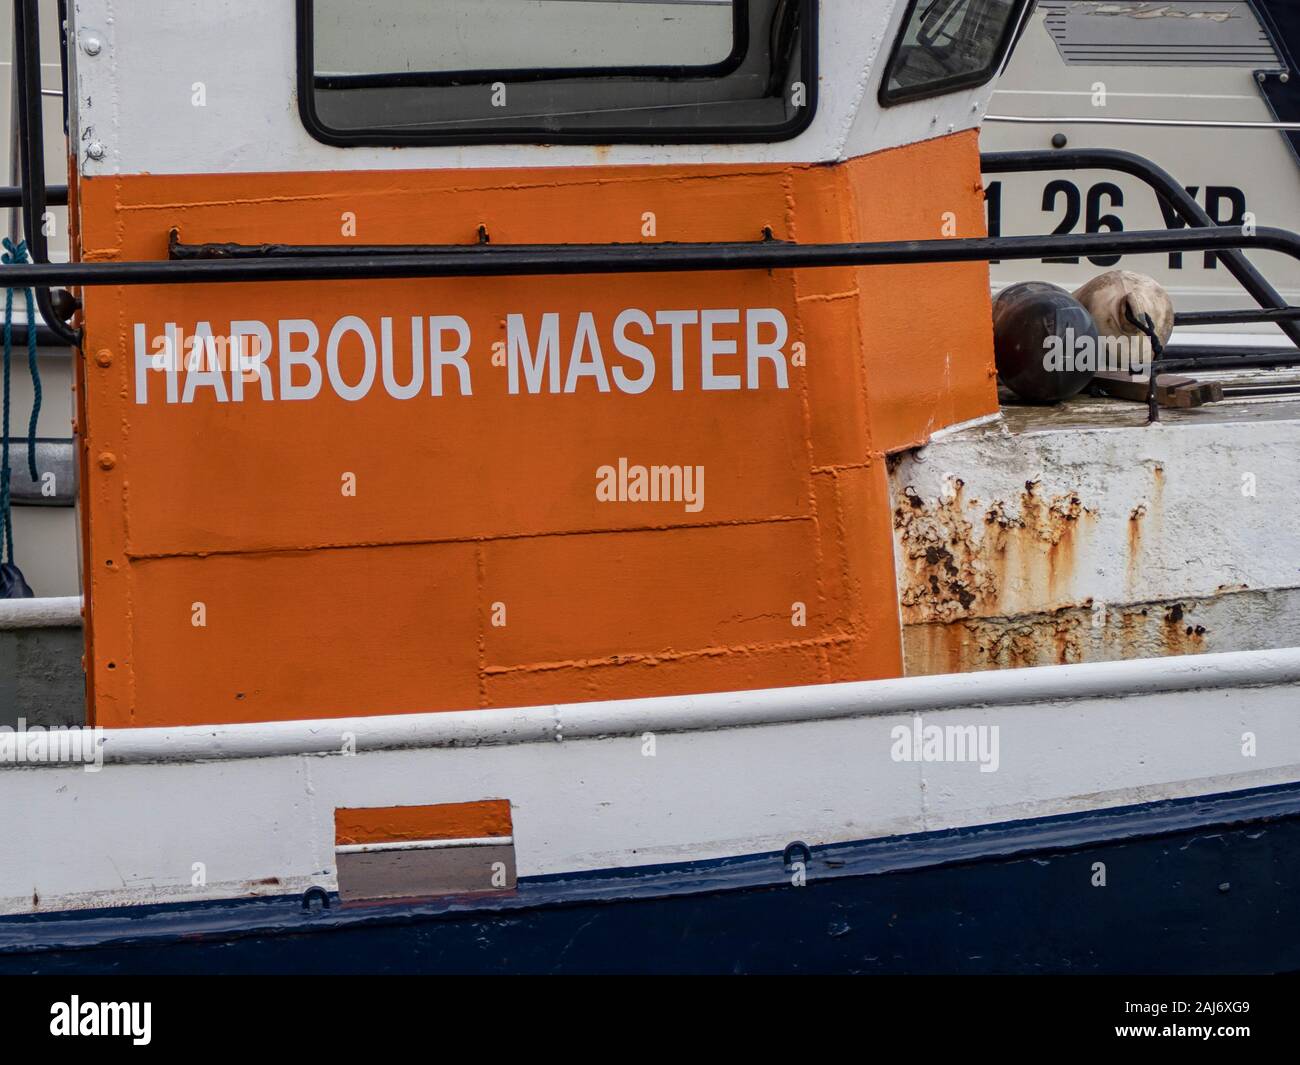 OULTON BROAD, SUFFOLK:  Harbour Master Boat Stock Photo